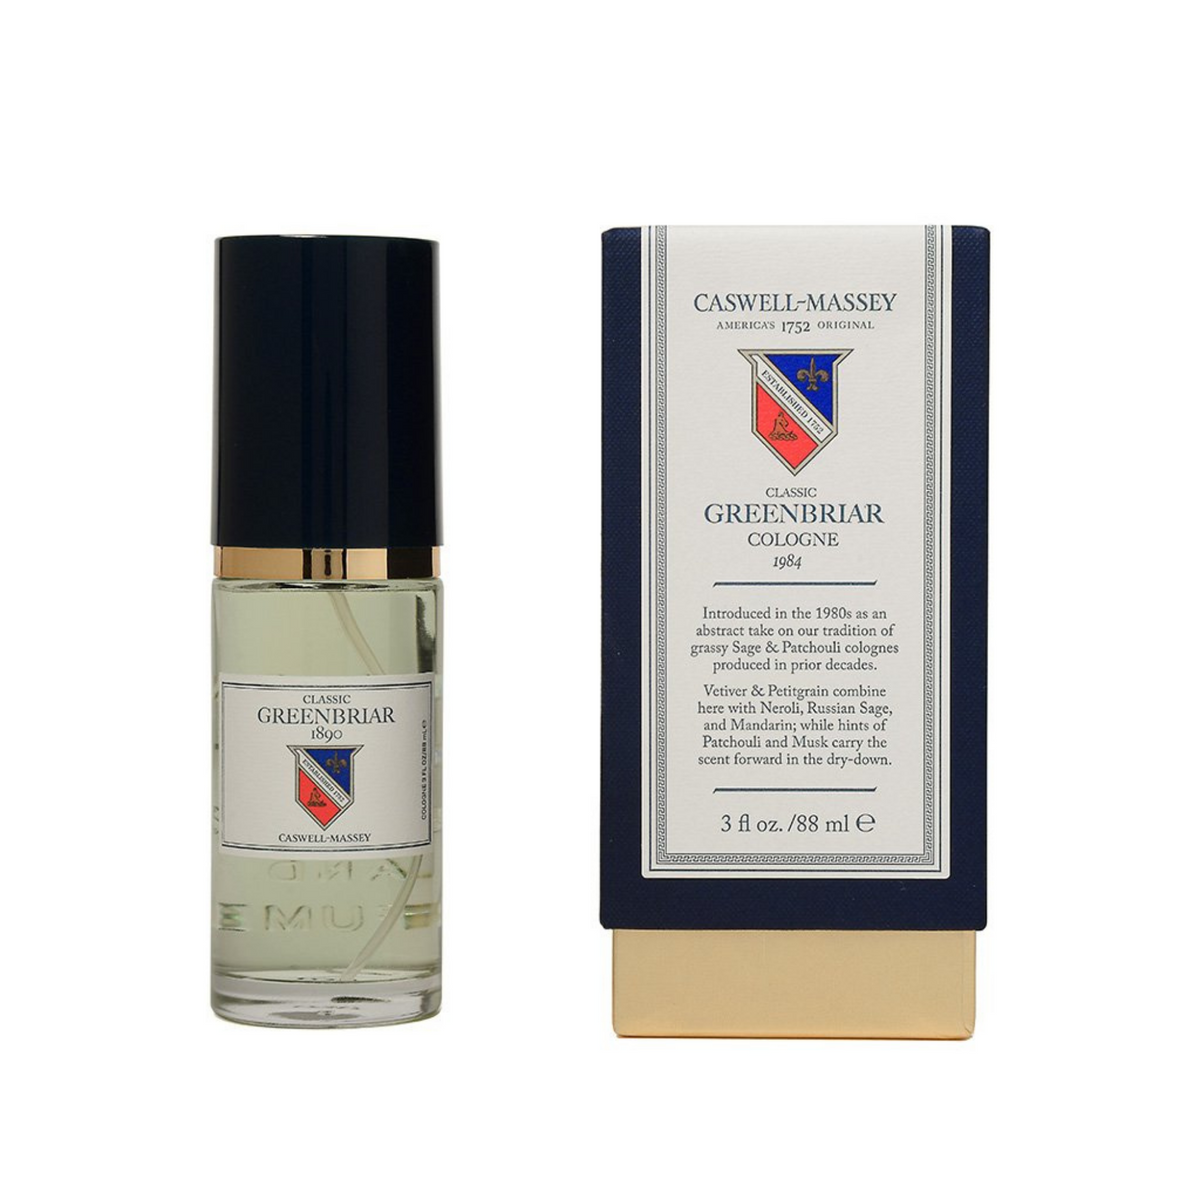 Primary image of Classic Greenbriar Cologne